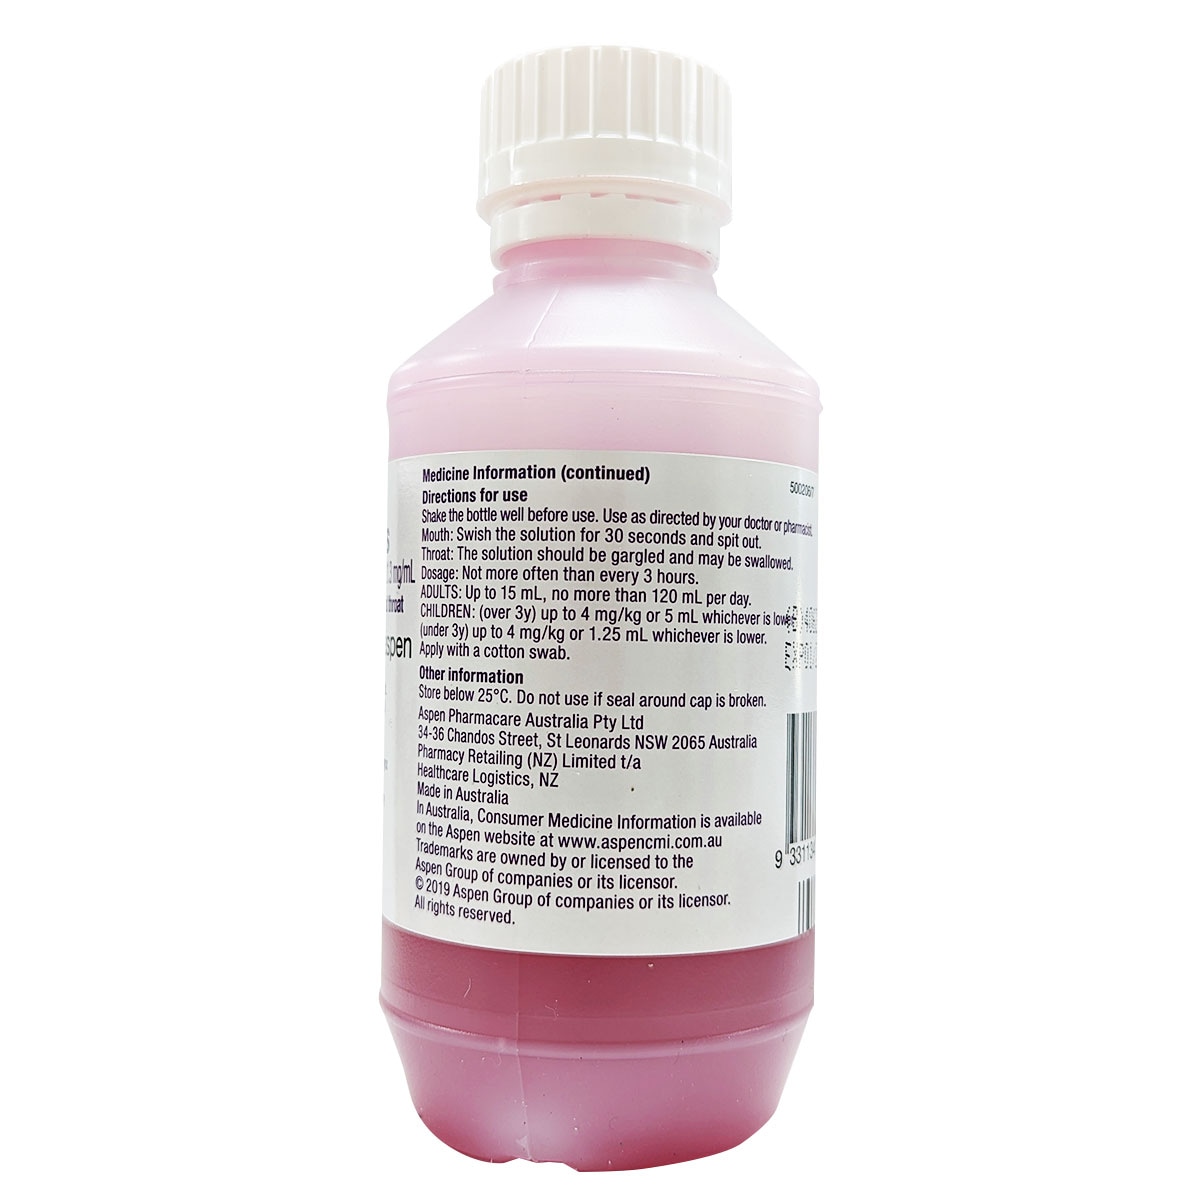 Xylocaine Viscous 2% Red Solution 200ml